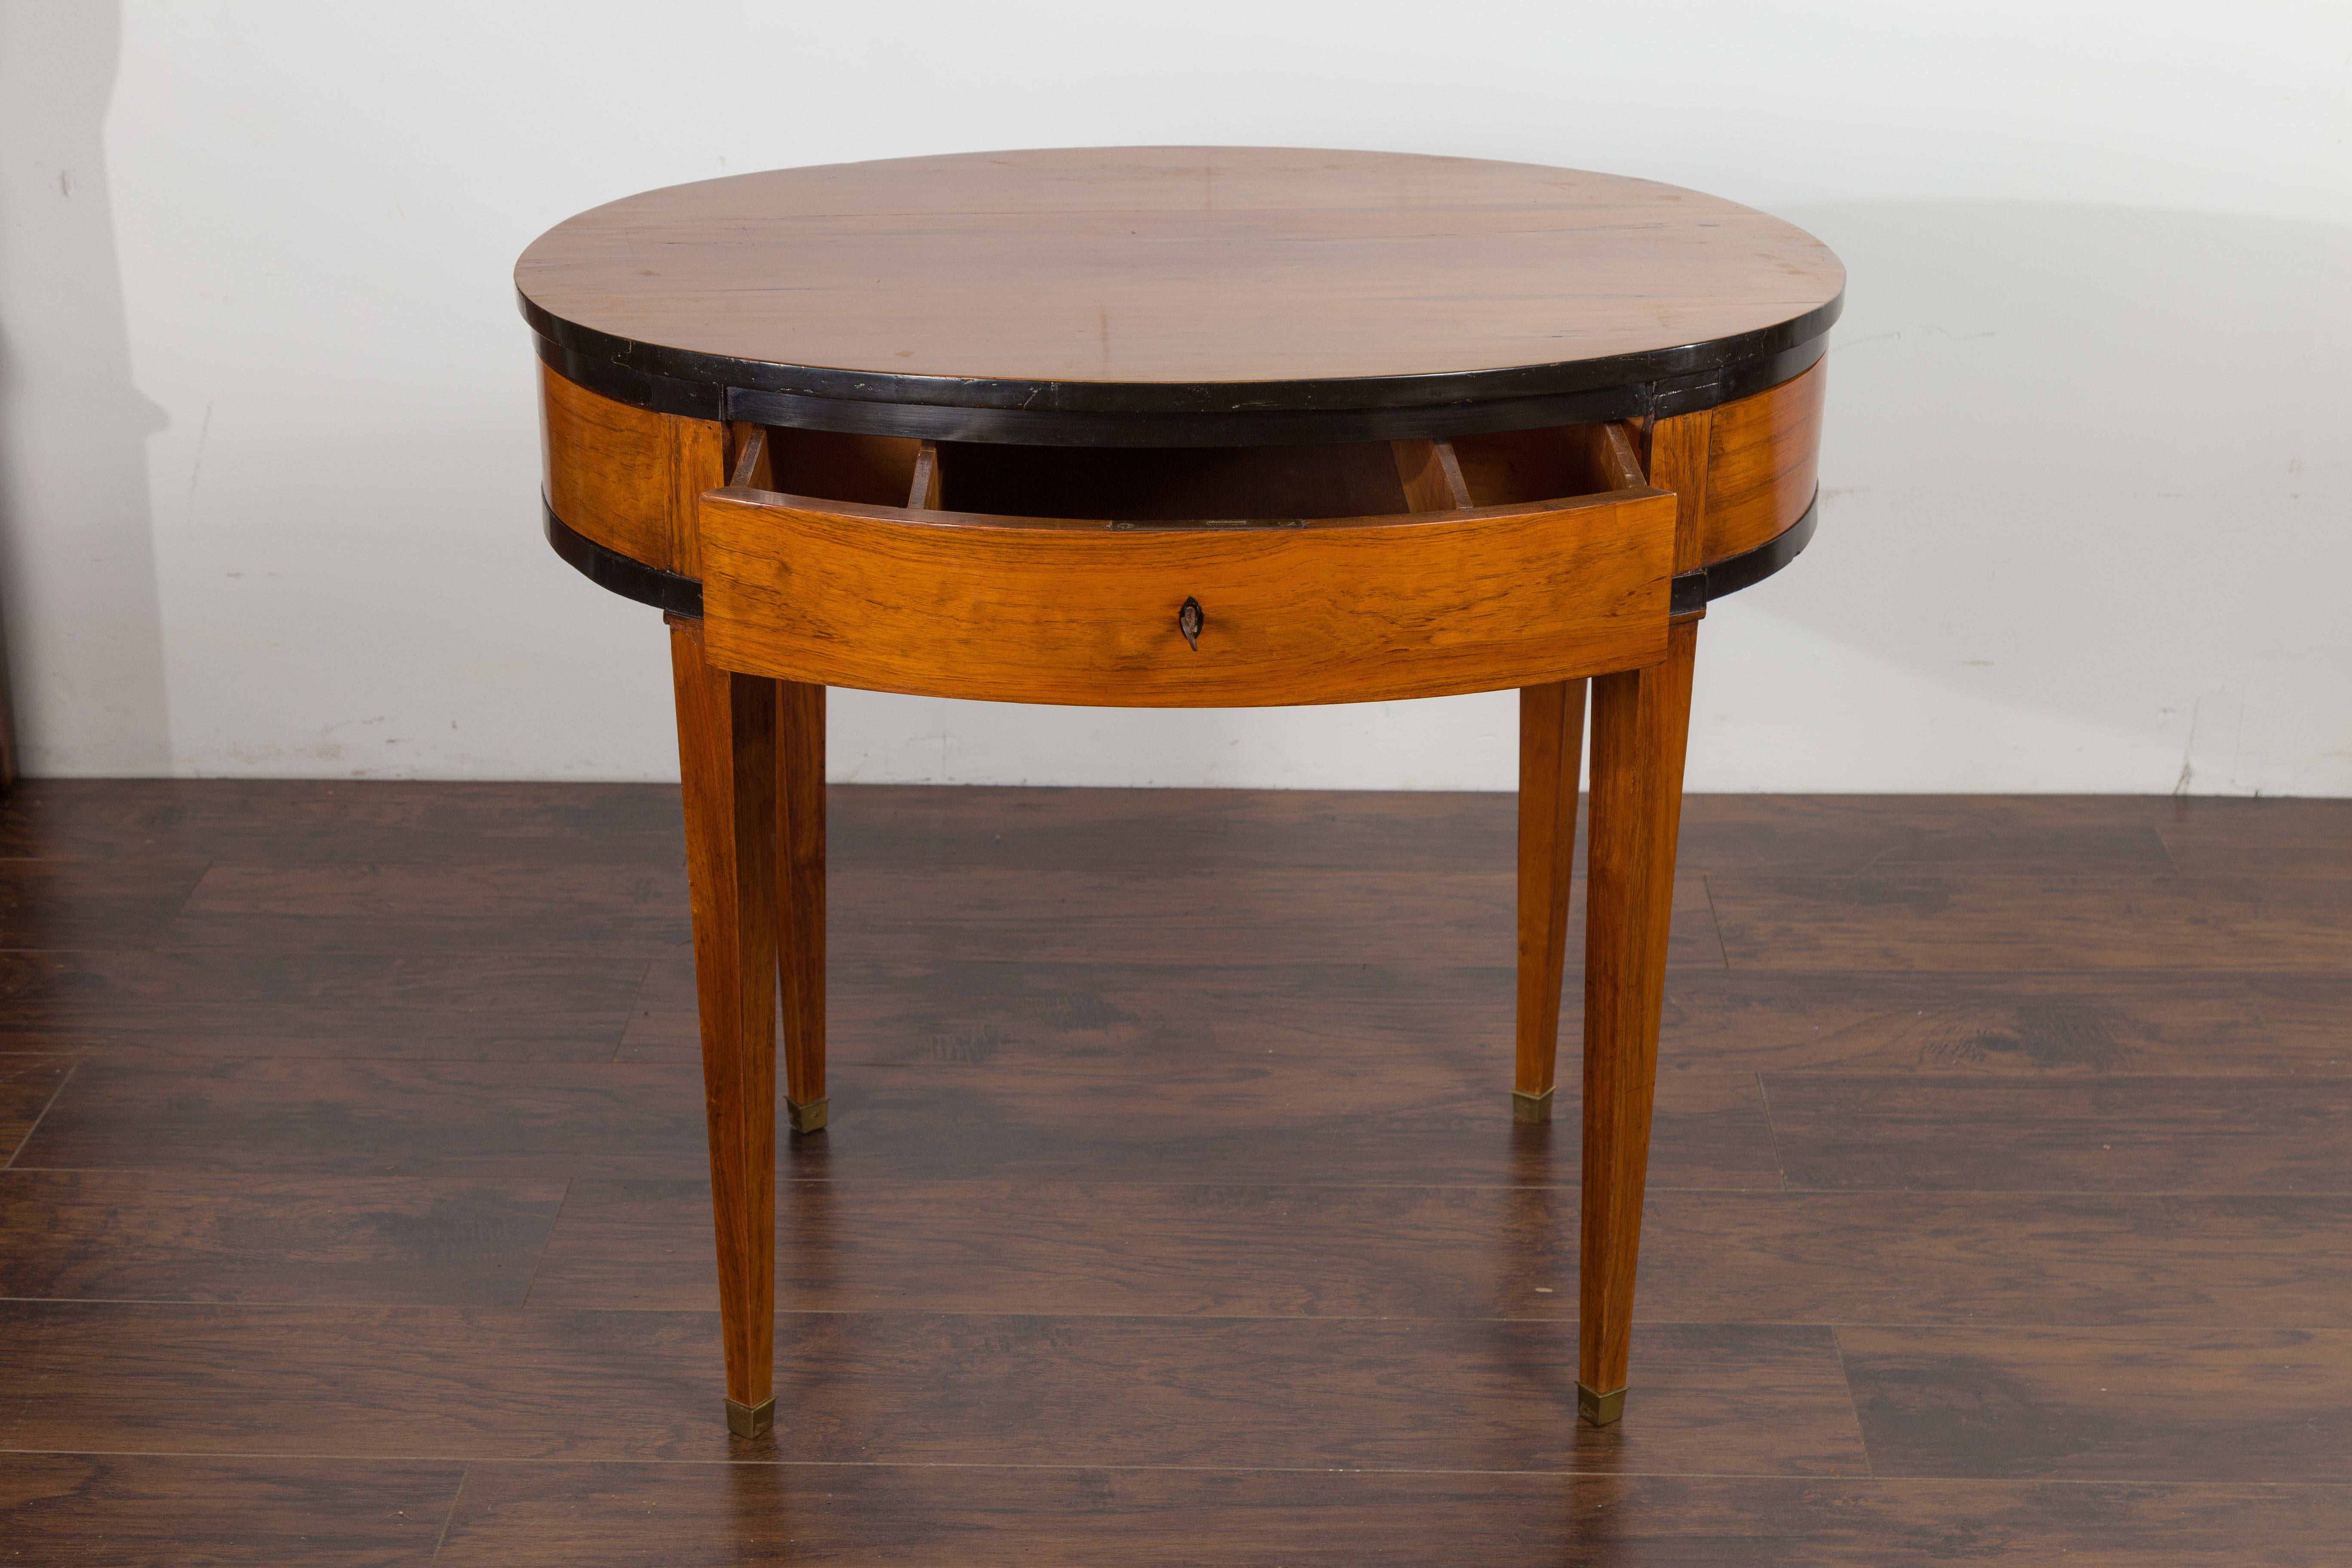 19th Century Austrian 1840s Biedermeier Oval Top Table with Drawer and Ebonized Accents